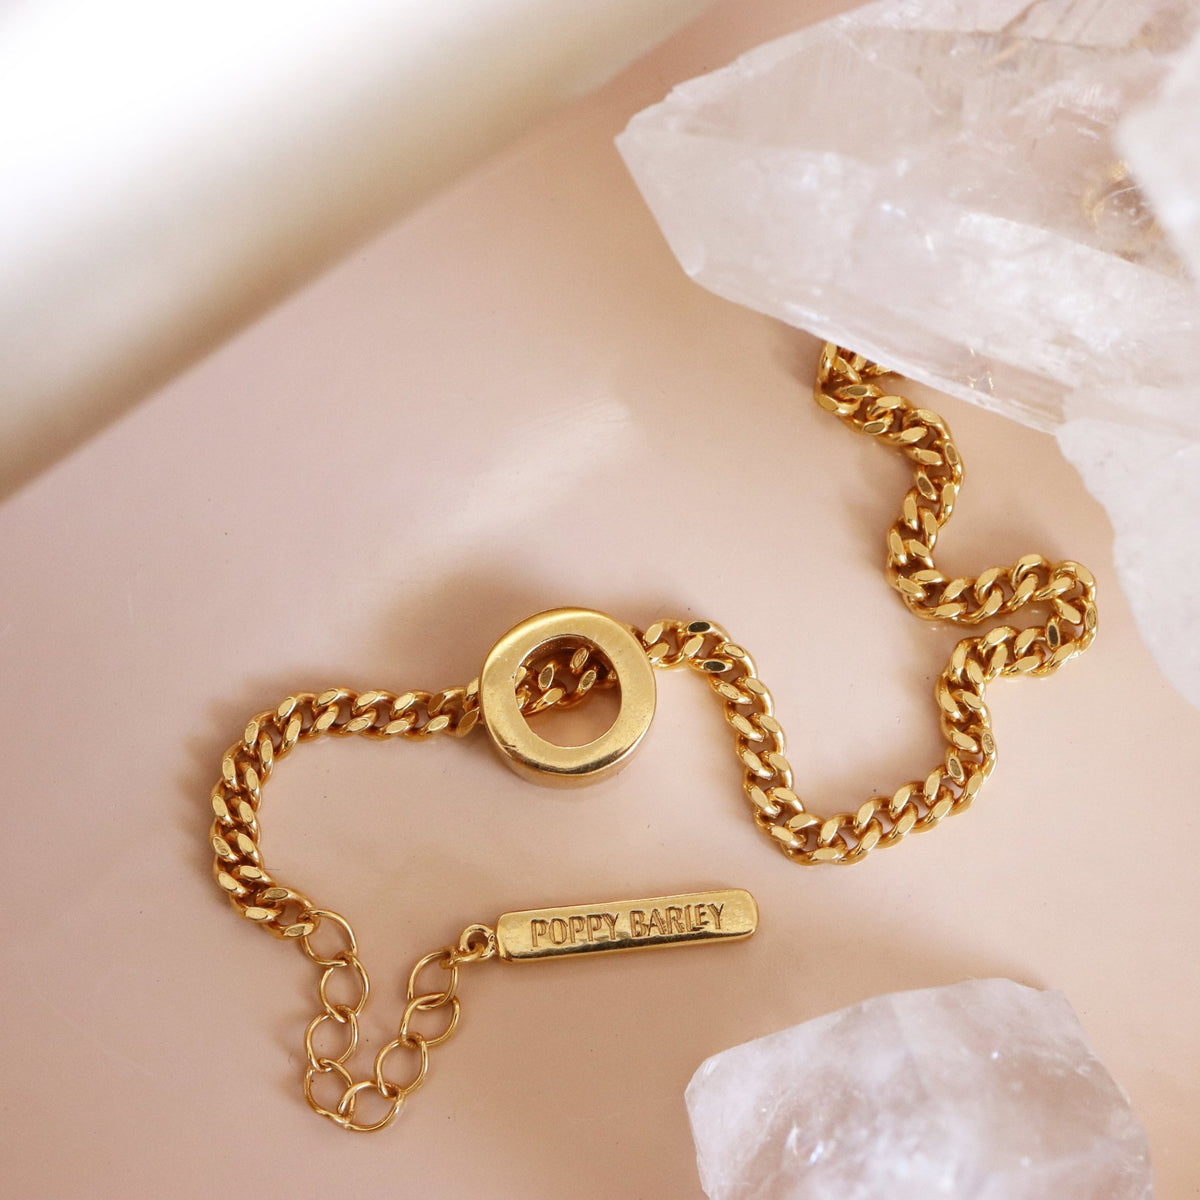 CHARMED INITIAL - O - GOLD OR SILVER - SO PRETTY CARA COTTER